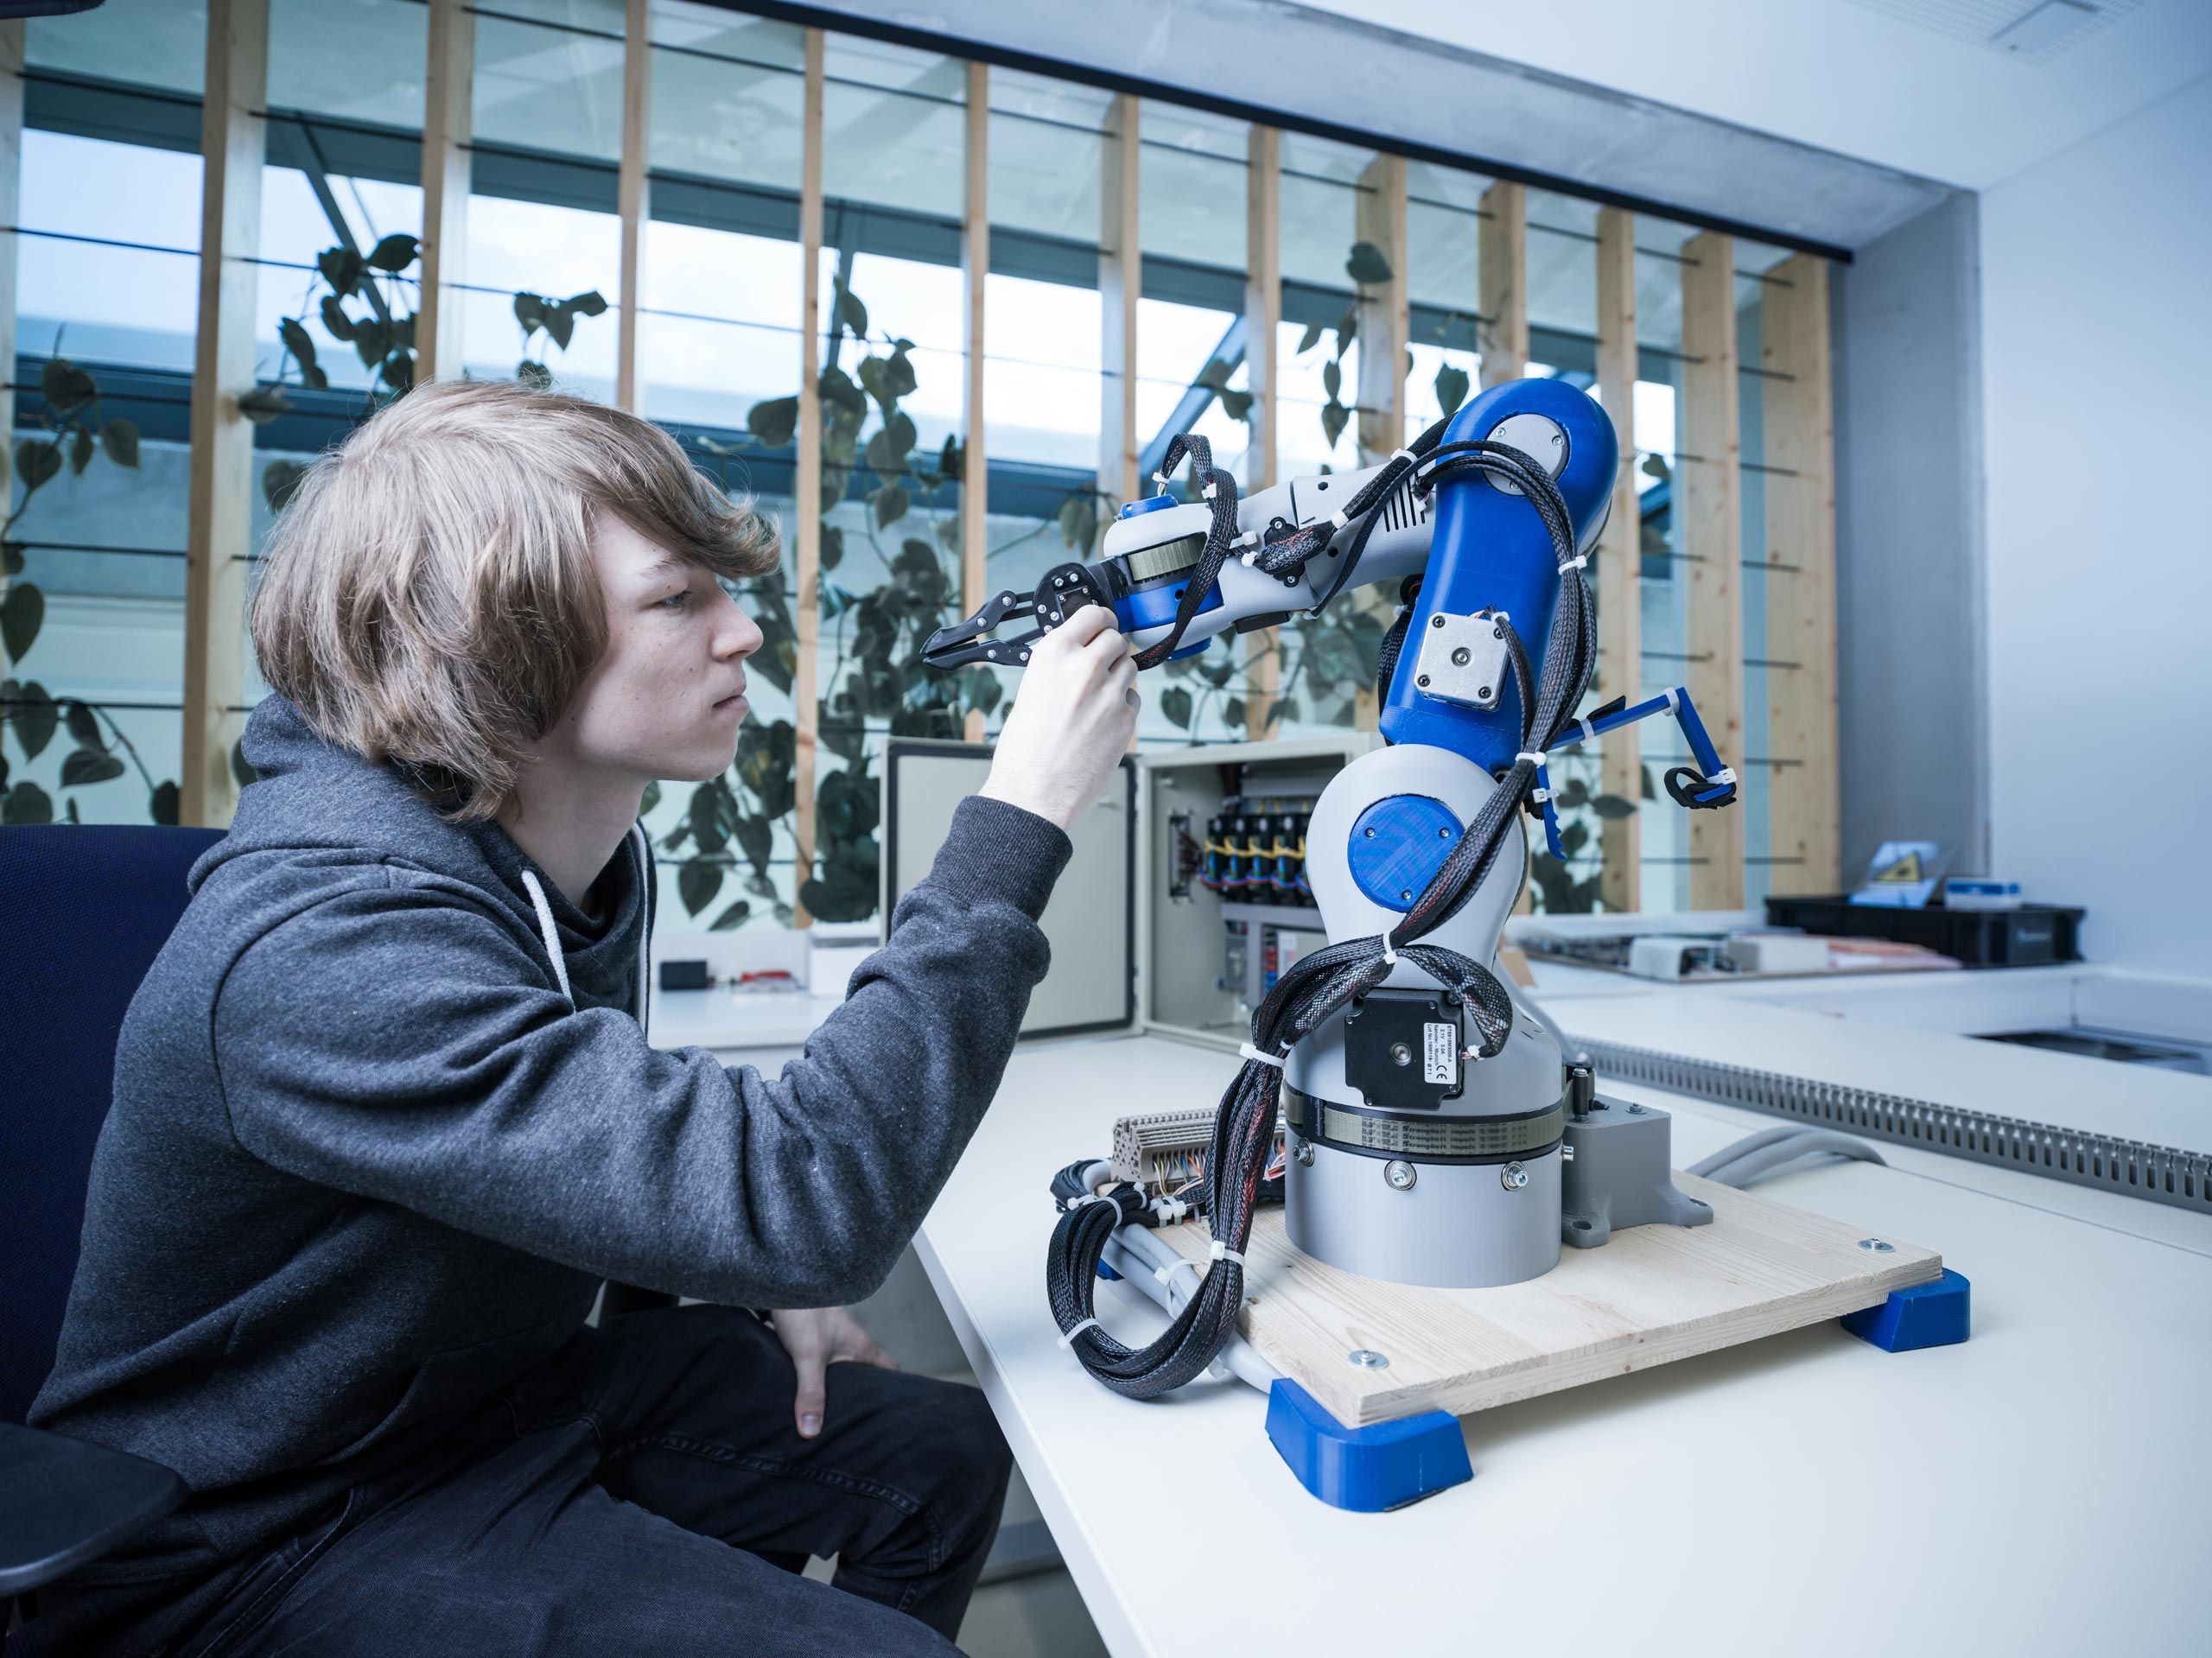 An apprentice works on a small robot 